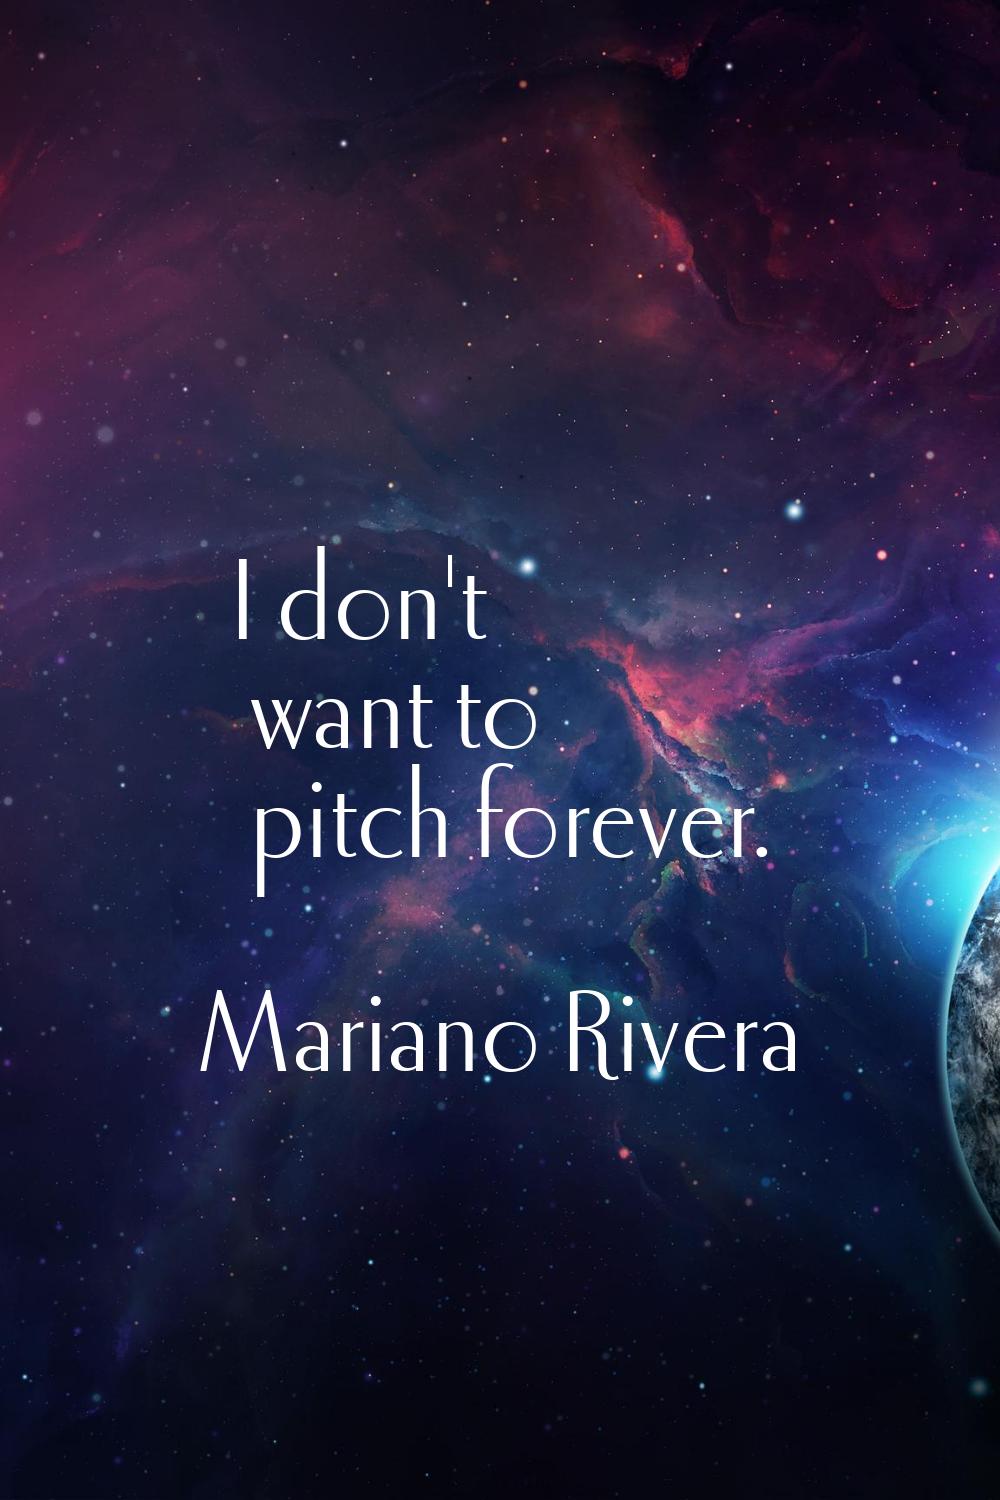 I don't want to pitch forever.